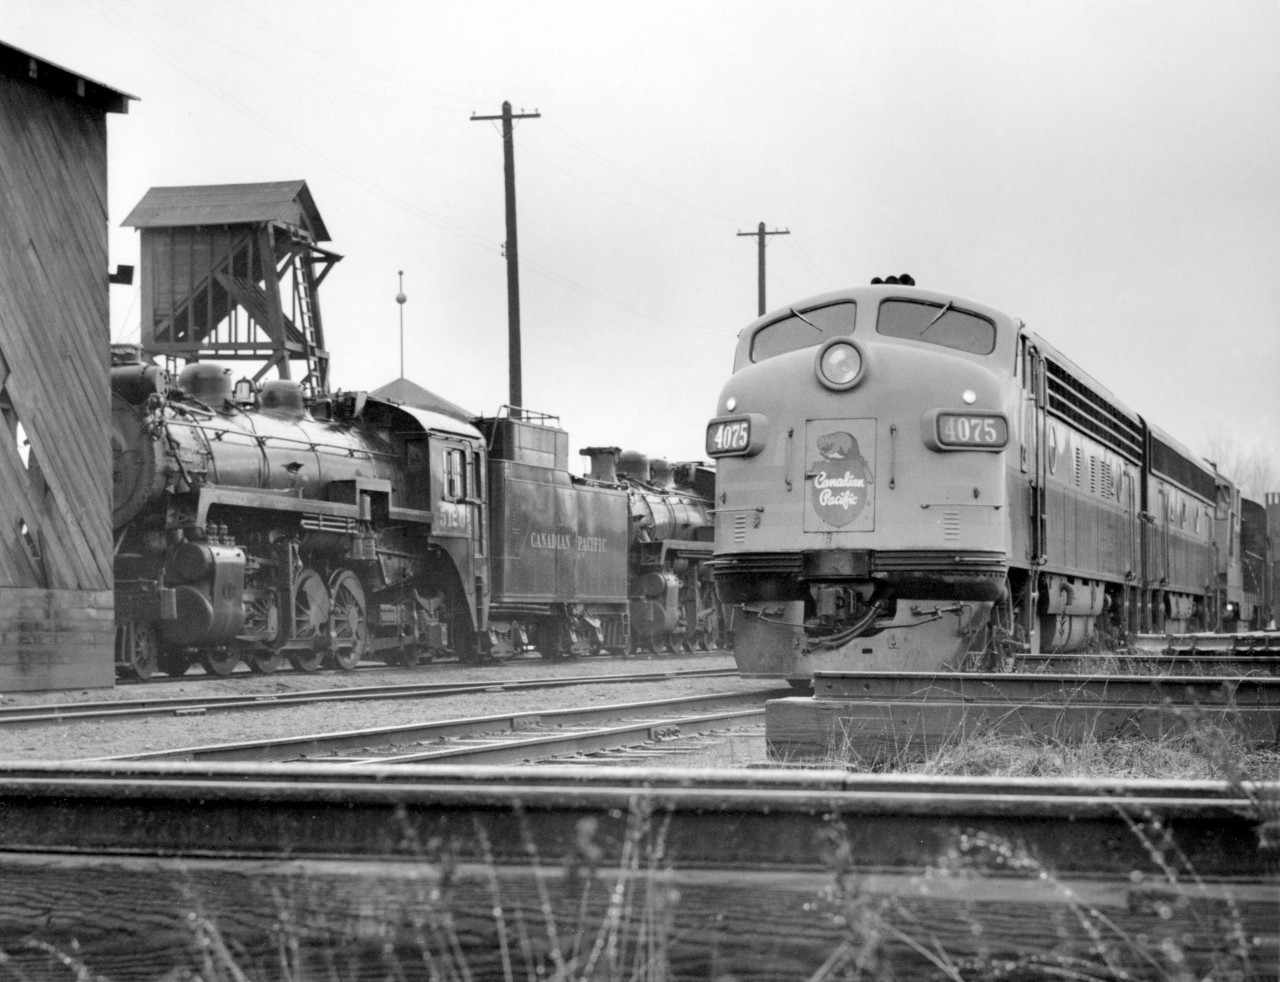 CP 5120 at left and four unit diesel combination 4075, ?, 8503 and 4035.